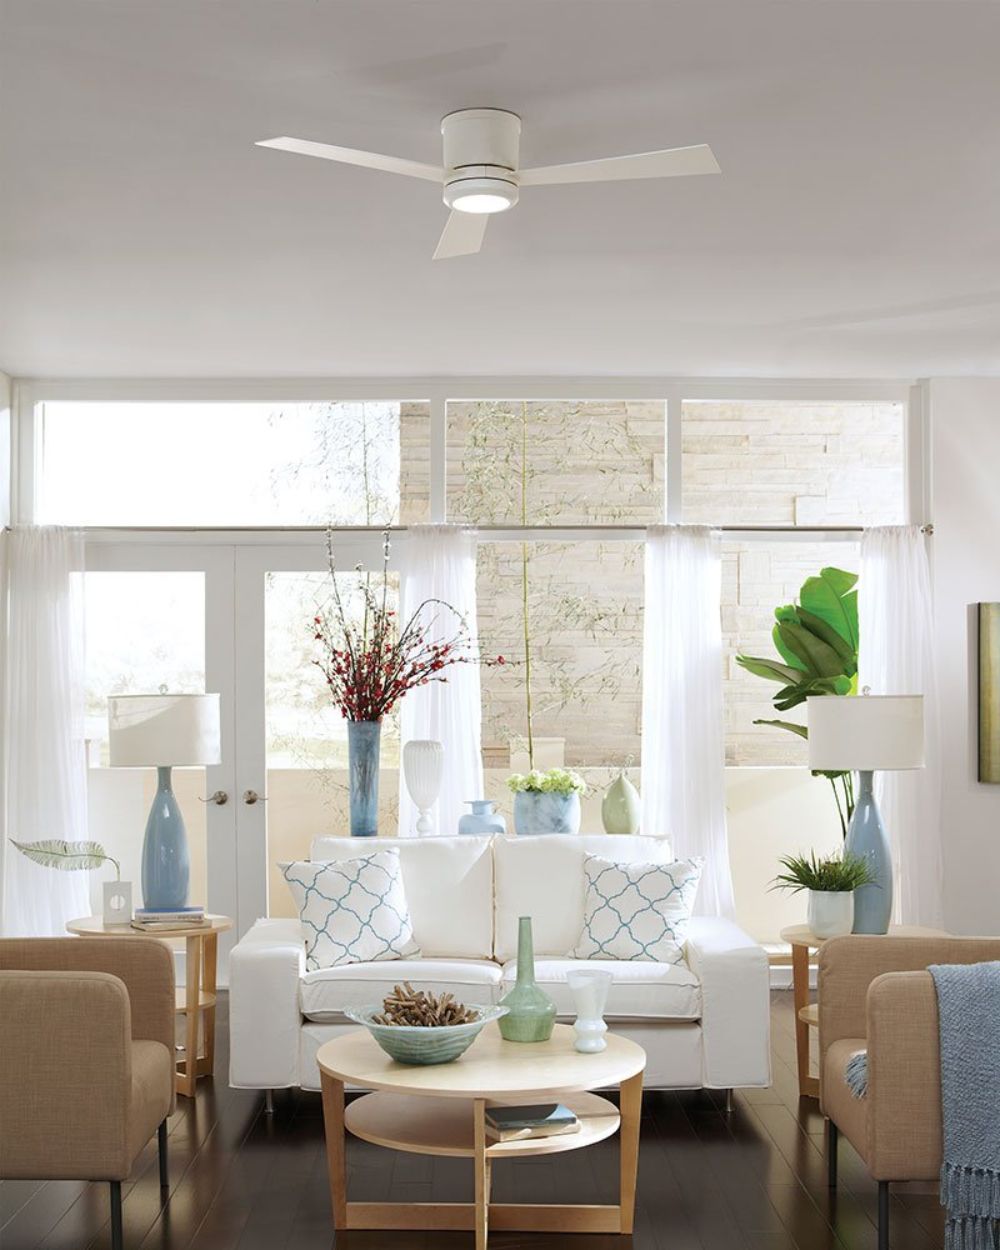 61eAteh4MuL._SL1000_-2 The Best Ceiling Fans to Get for Your Rooms